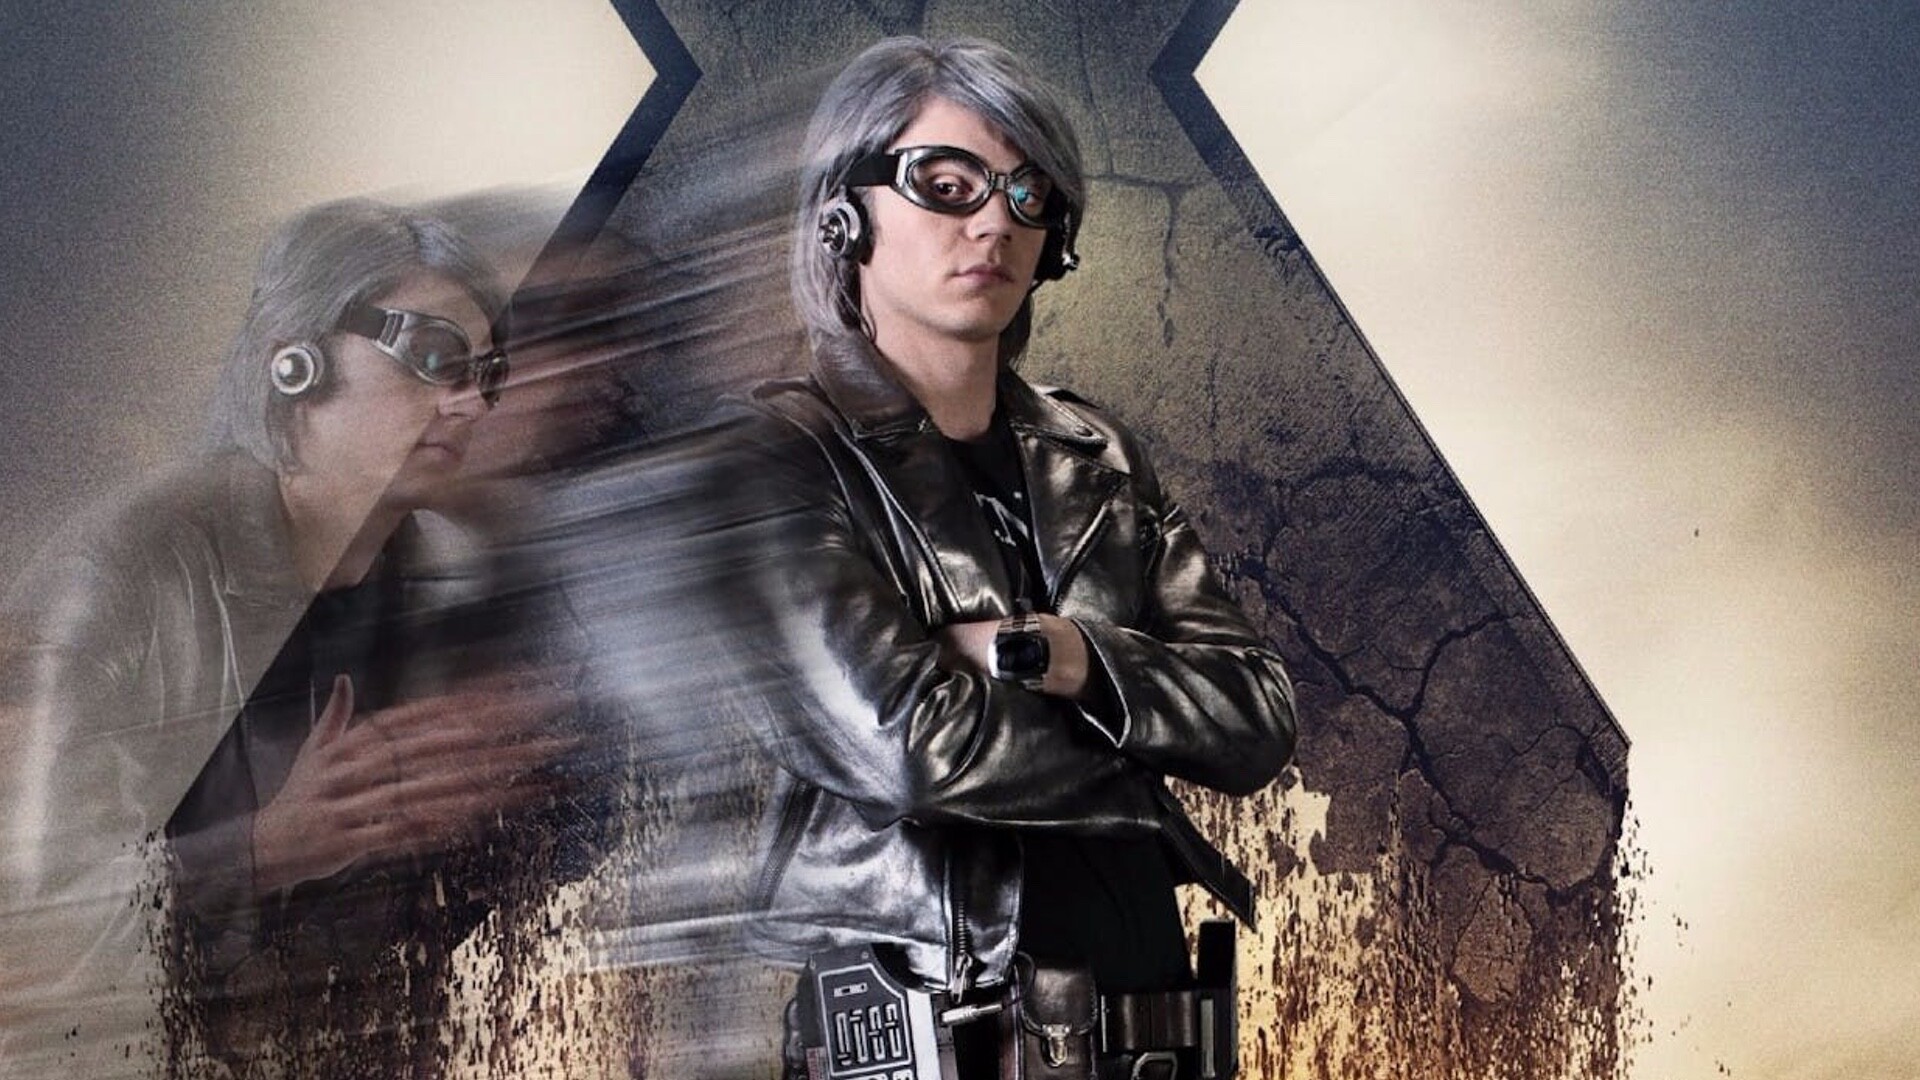 Quicksilver (Marvel): Evan Peters as a mutant who can move, speak and think at supersonic speeds. 1920x1080 Full HD Wallpaper.